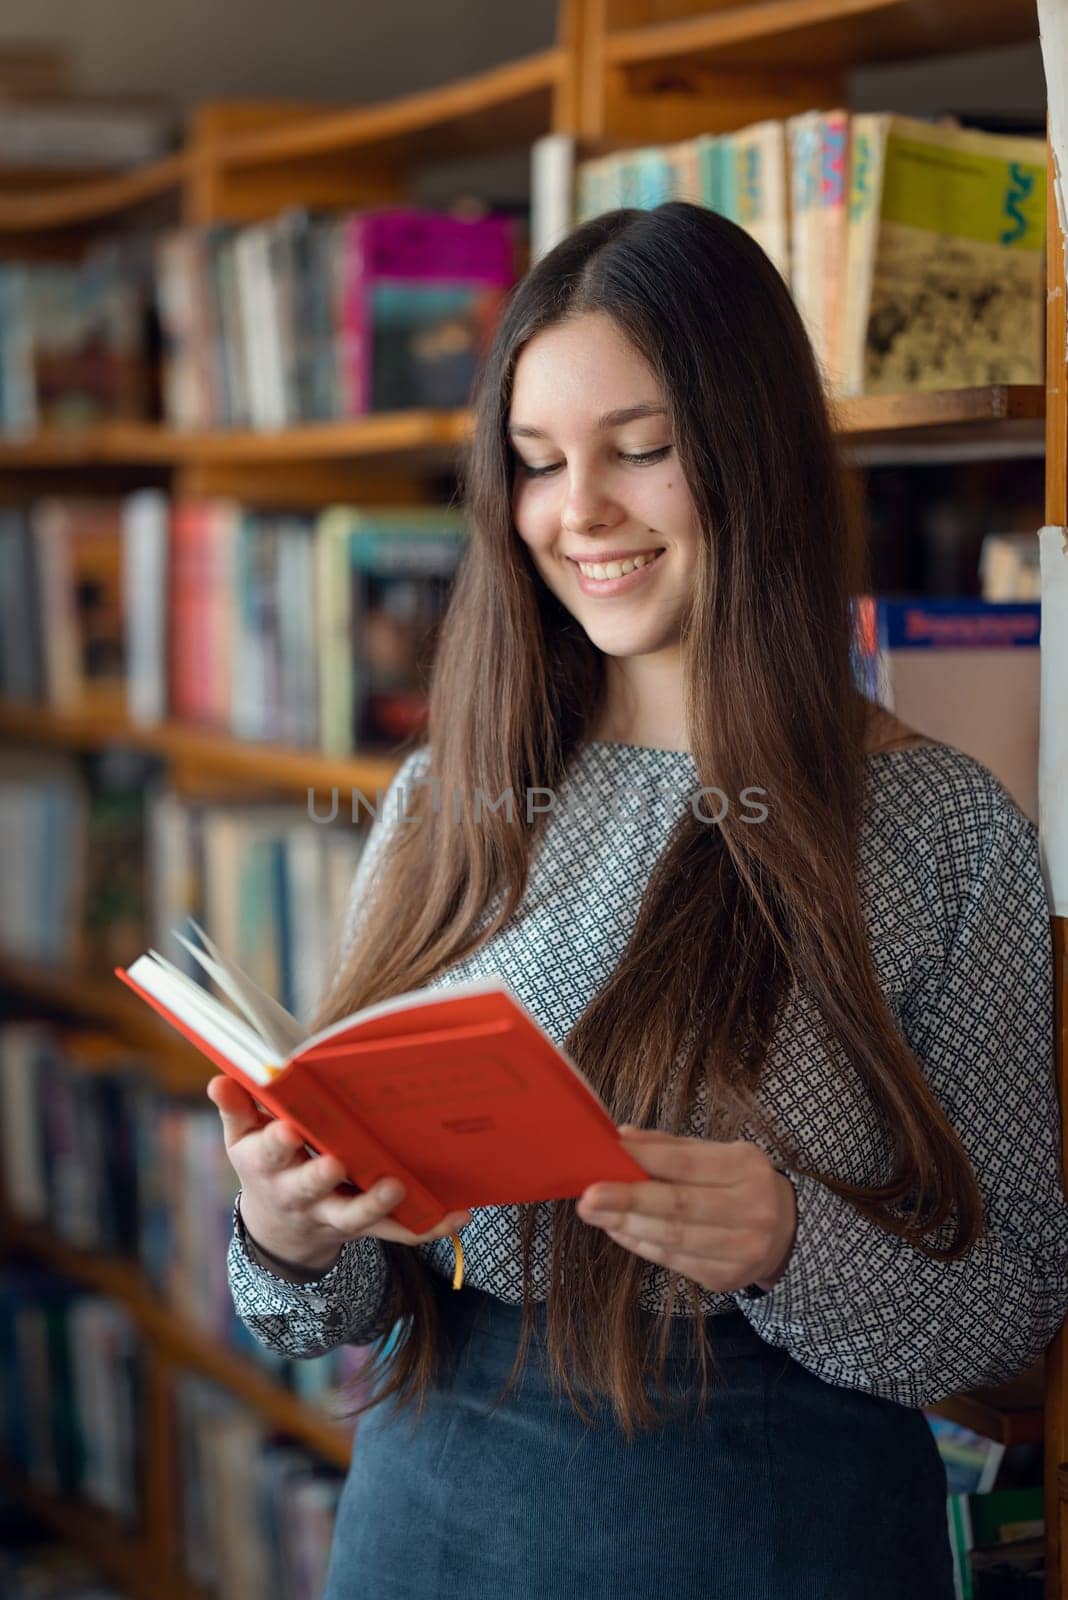 Attractive female brunette student standing with a book in her hands near the rows of bookshelves in library by VitaliiPetrushenko